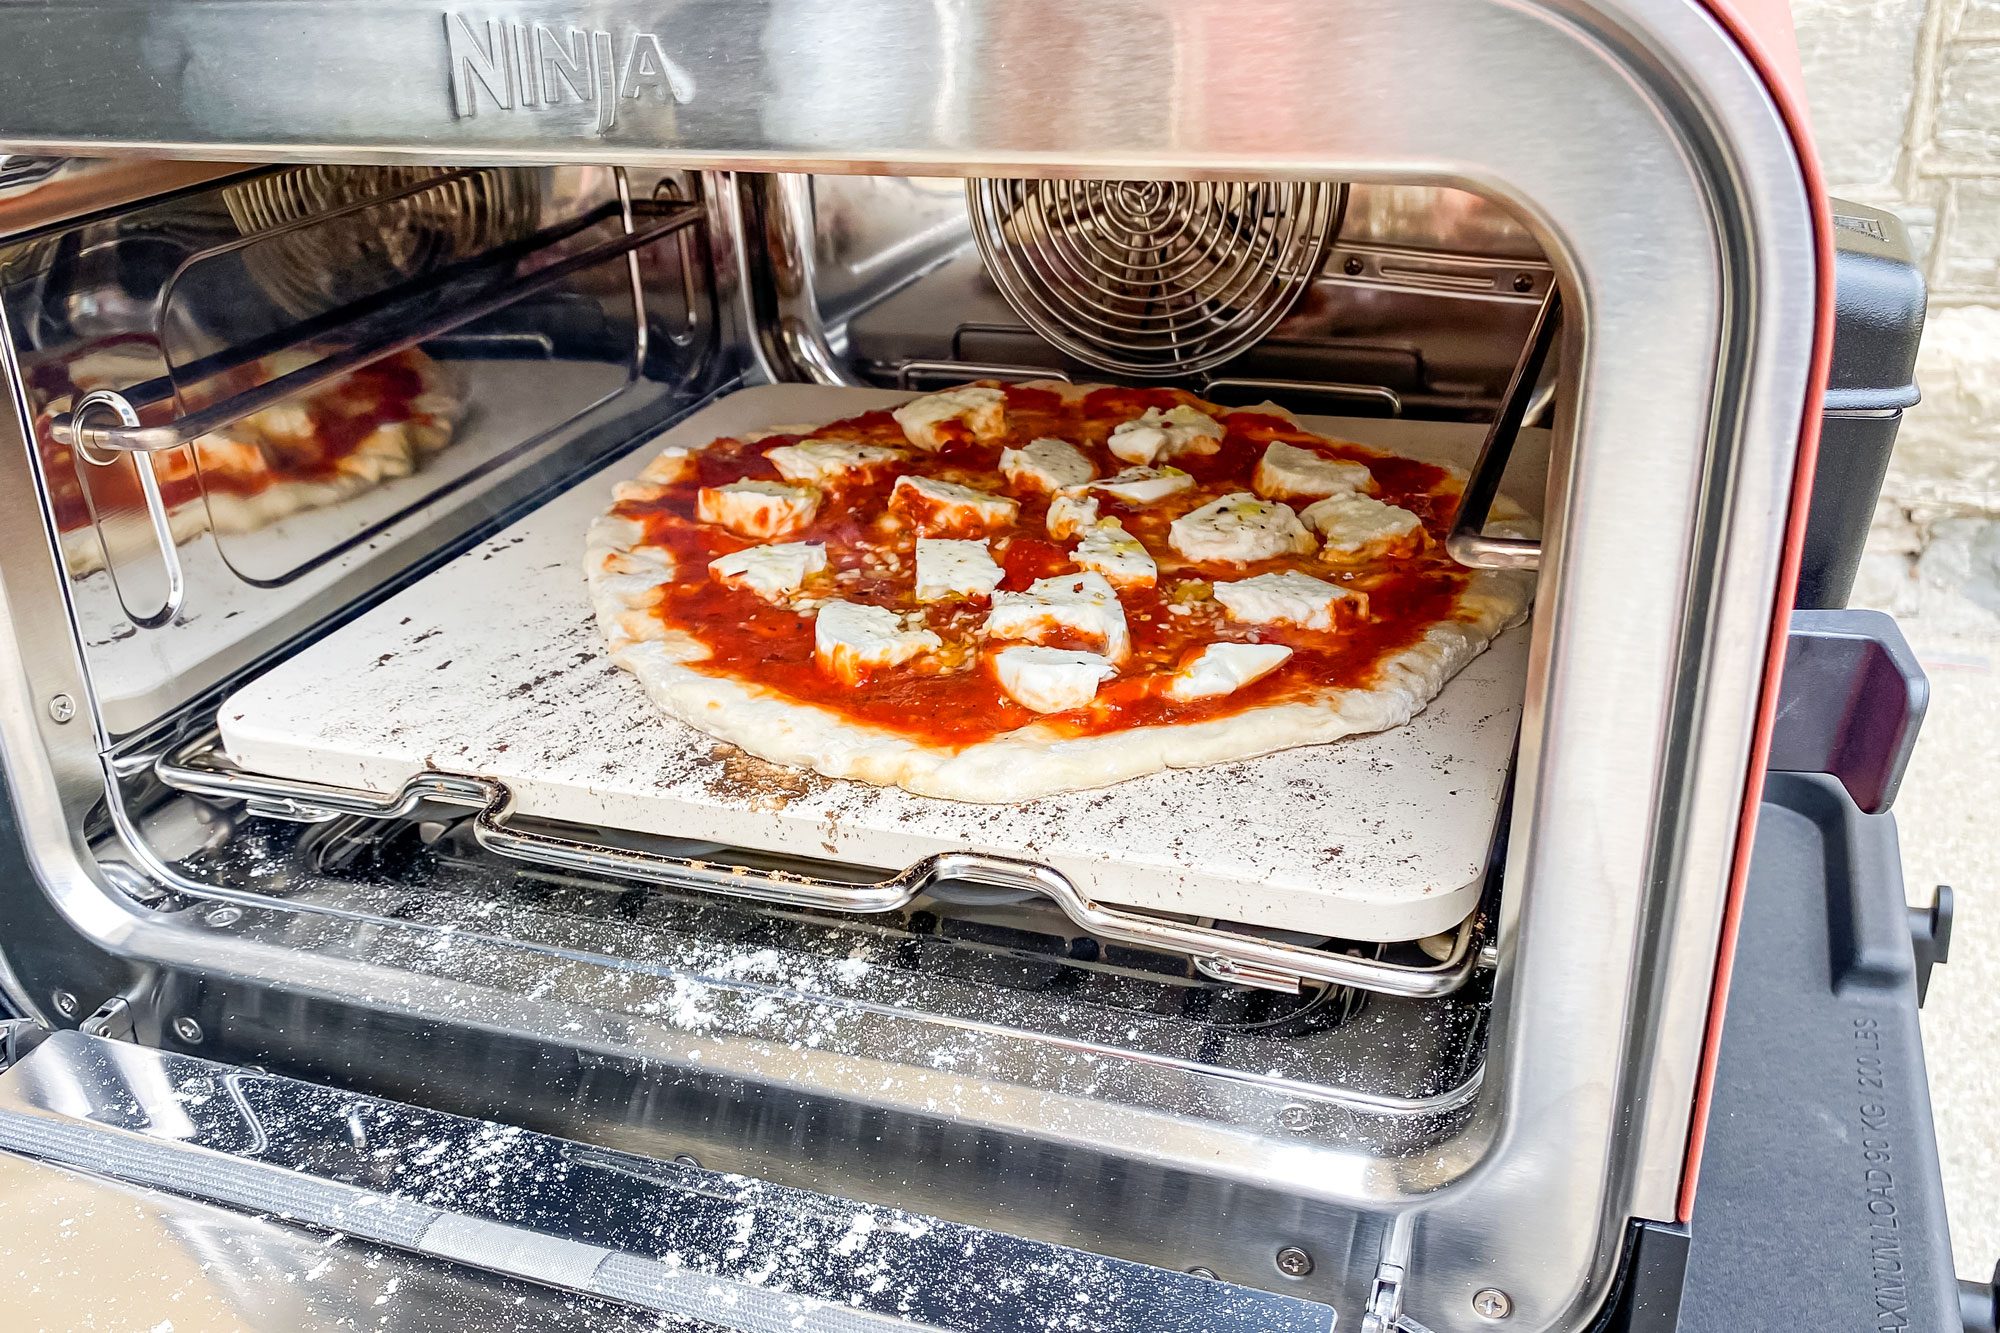 Ninja Woodfire 8-in-1 Outdoor Oven Review: More than just a pizza